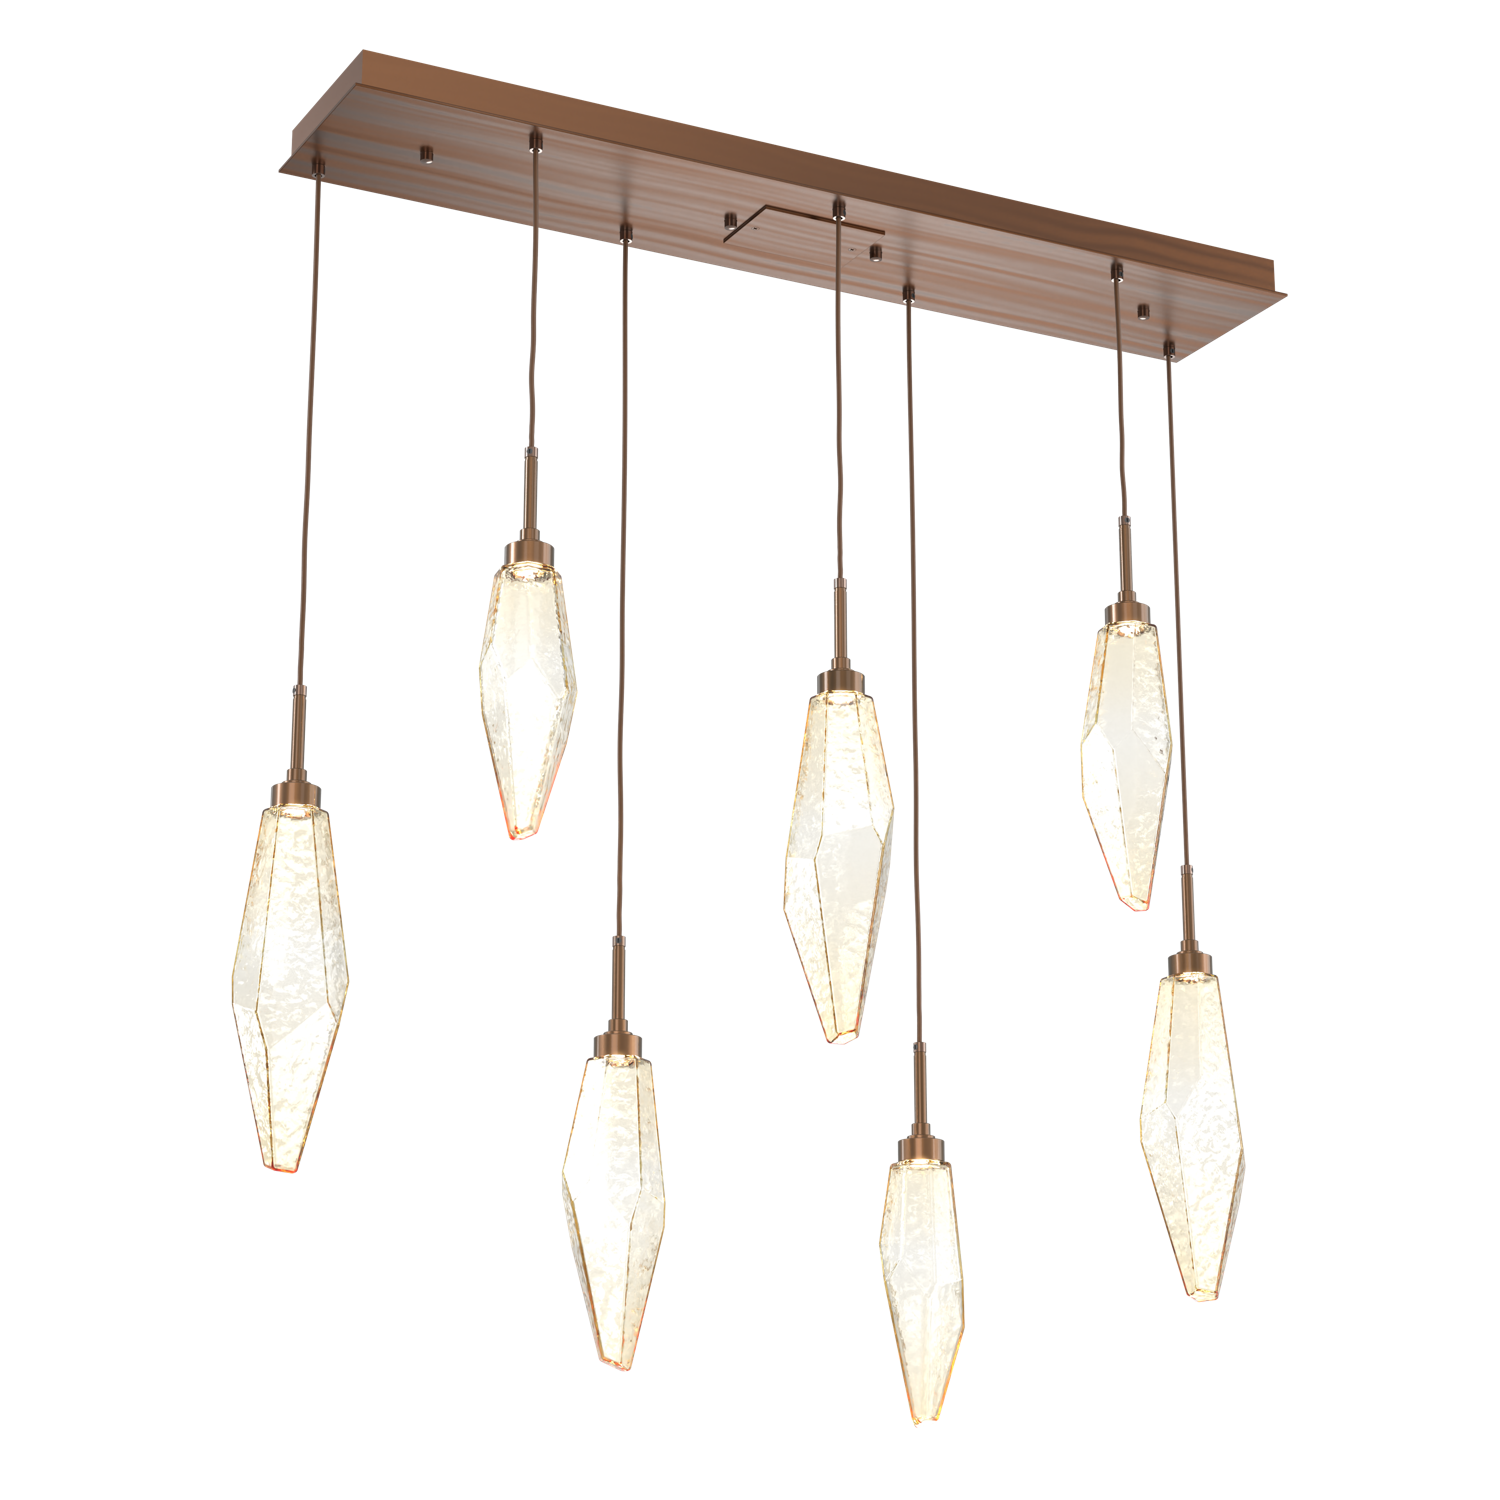 PLB0050-07-RB-CA-Hammerton-Studio-Rock-Crystal-7-light-linear-pendant-chandelier-with-oil-rubbed-bronze-finish-and-chilled-amber-blown-glass-shades-and-LED-lamping